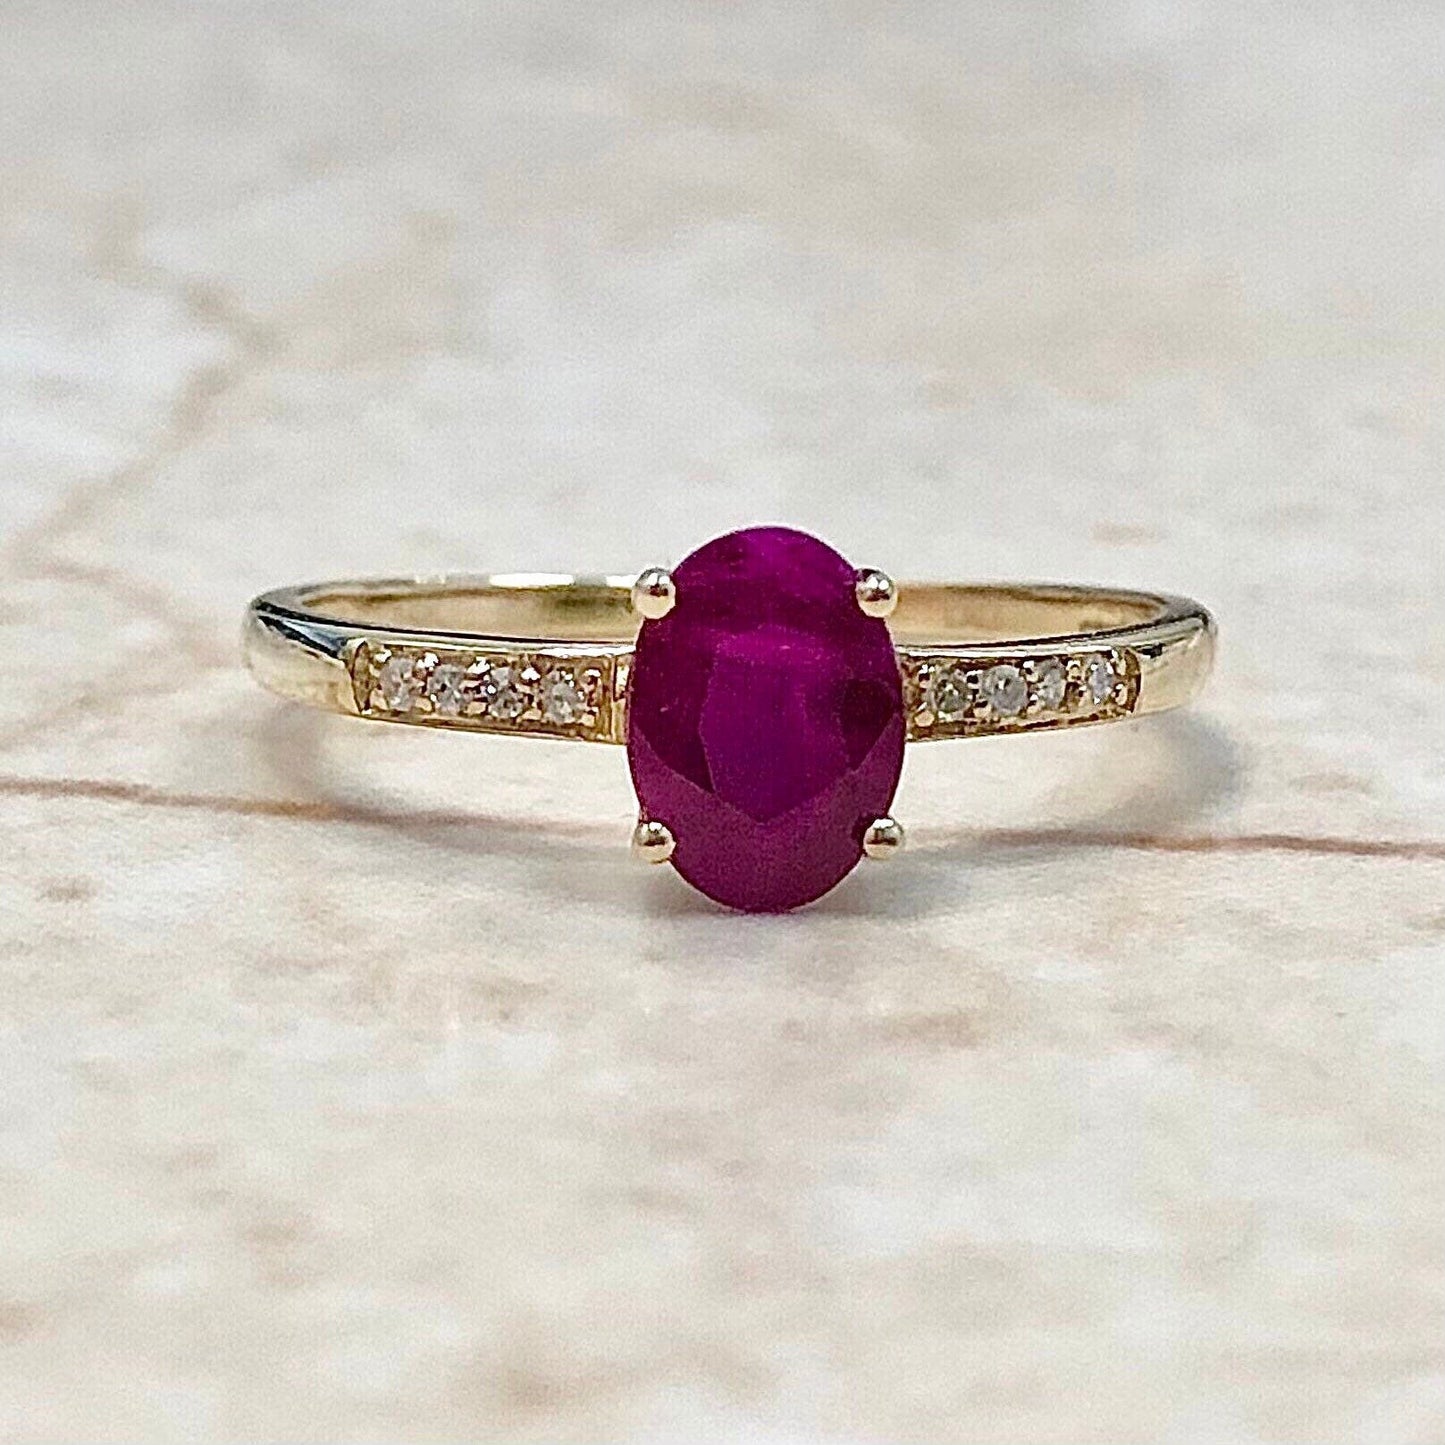 14K Natural Oval Ruby & Diamond Ring - Yellow Gold Ruby Solitaire Ring- July Birthstone - Birthday Gift - Best Gift For Her - Jewelry Sale